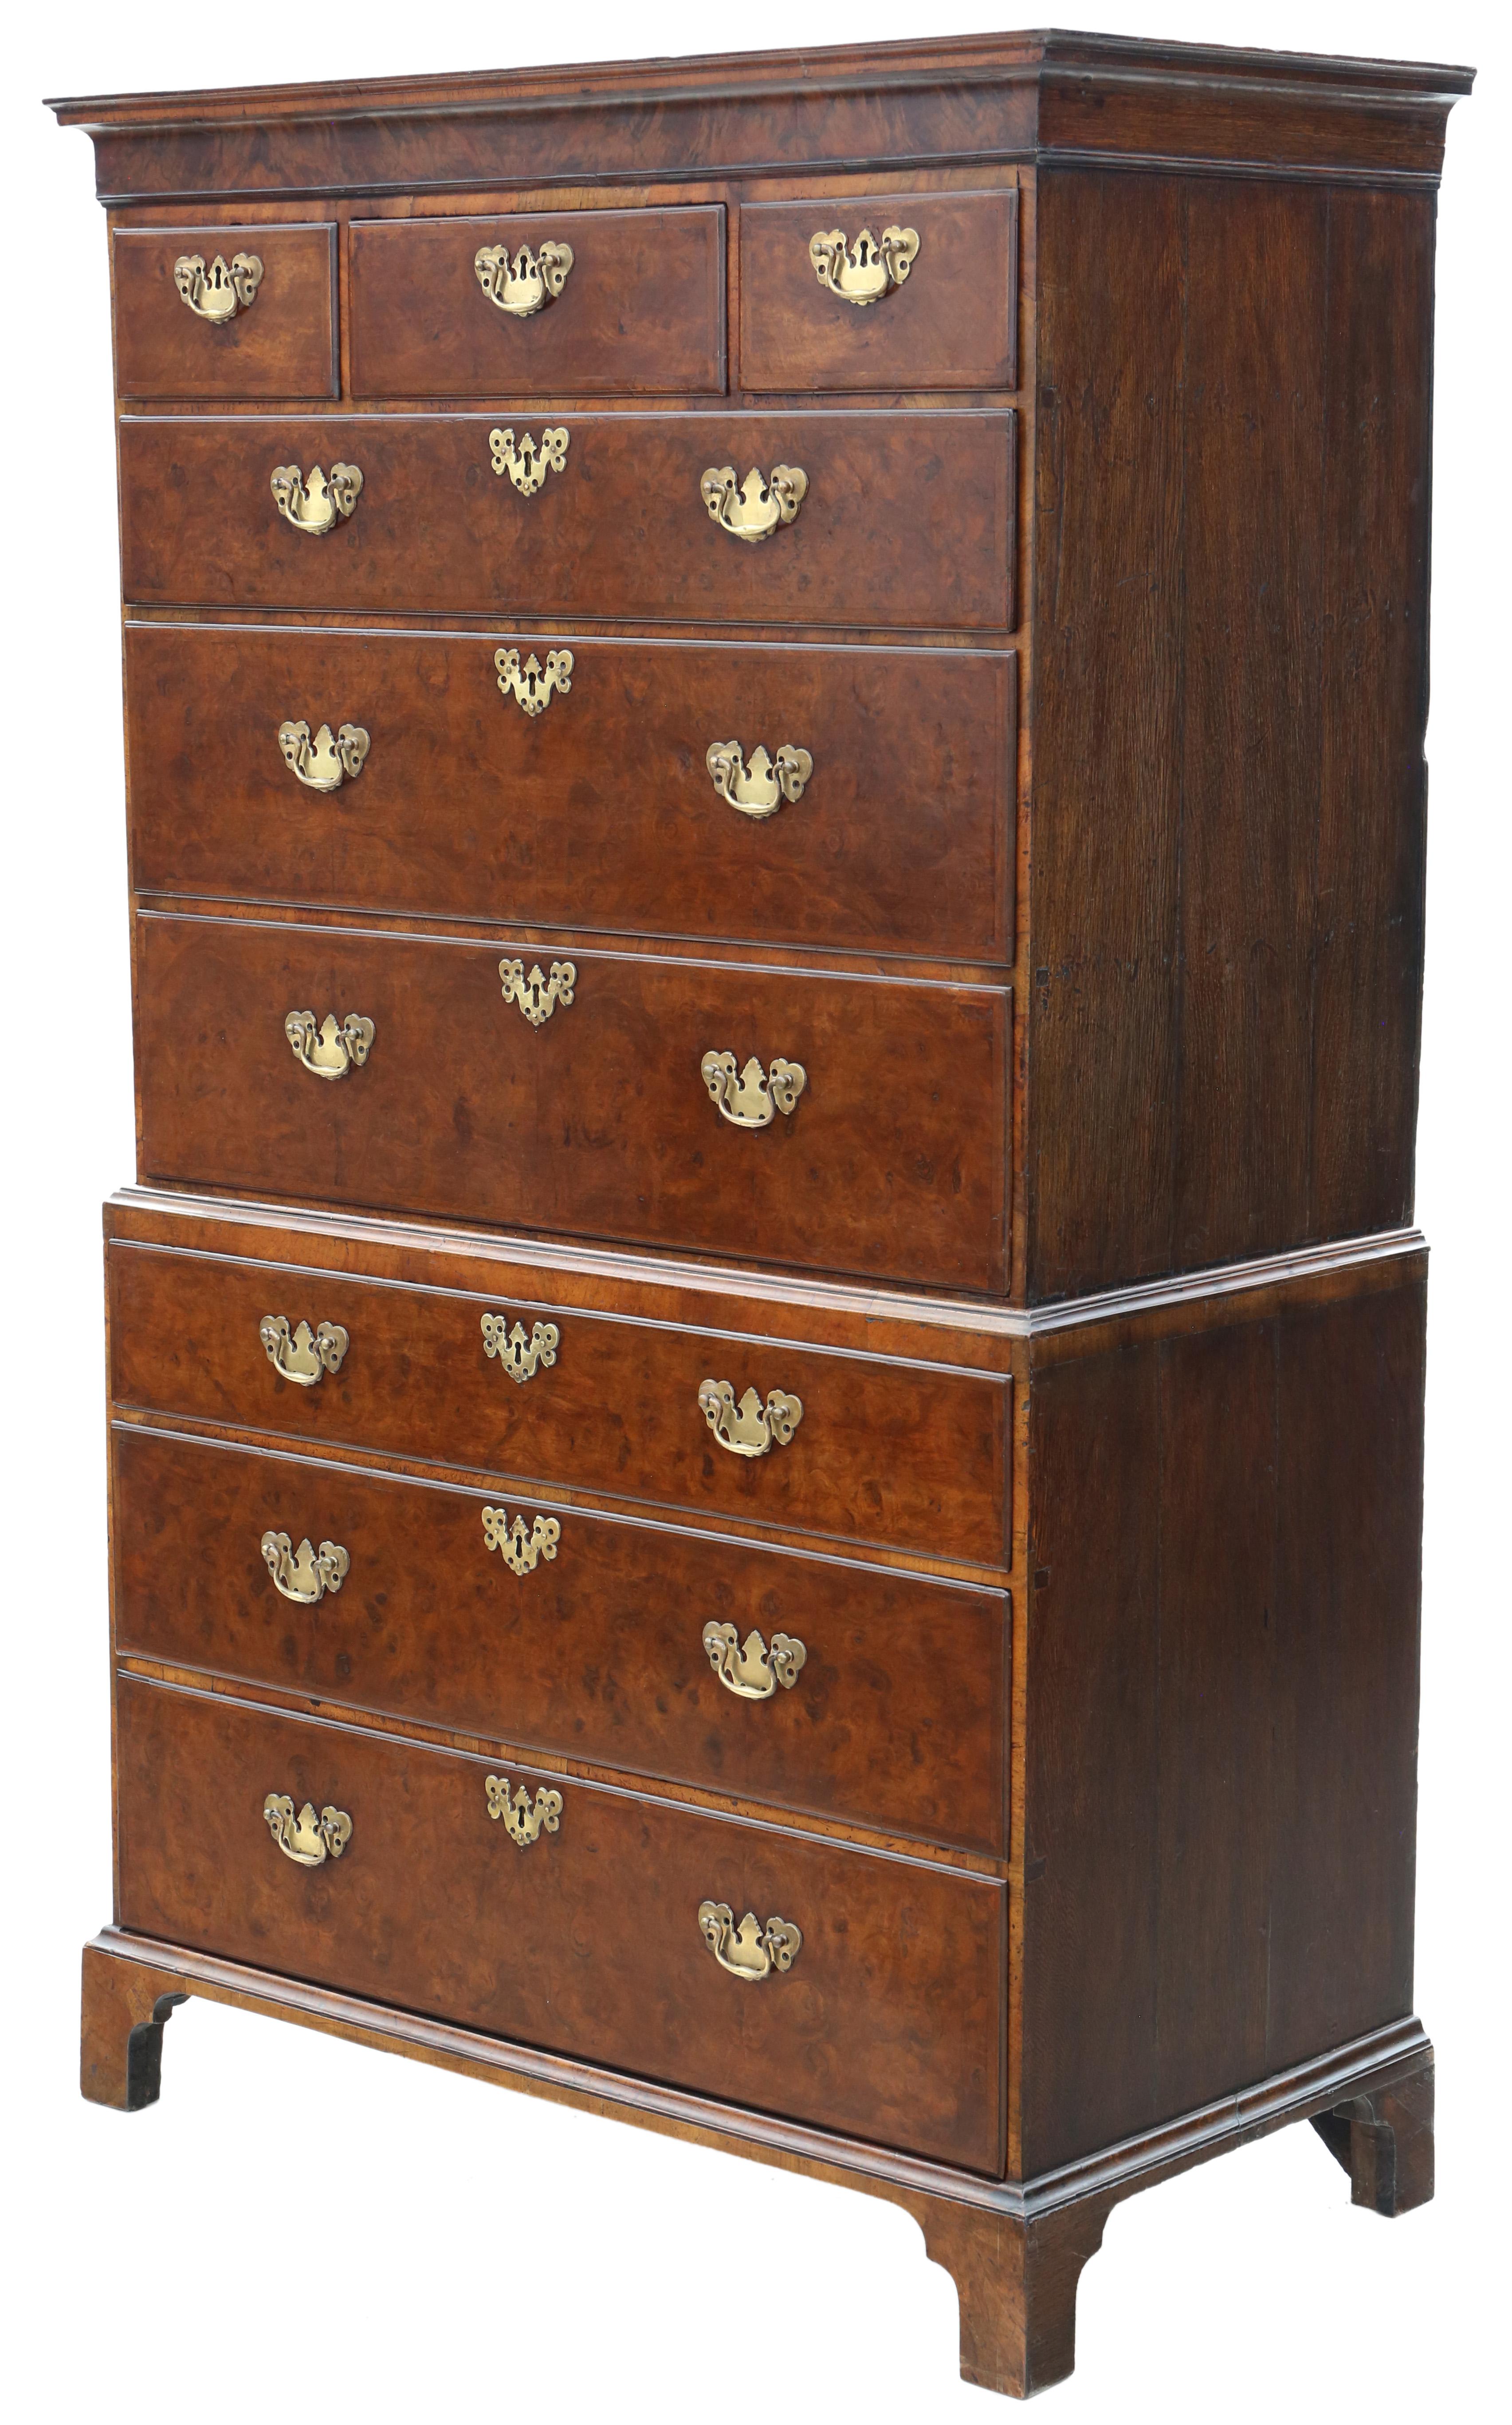 Antique fine quality 18th Century burr walnut tallboy chest on chest of drawers.
This is a lovely chest, that has been restored historically to a good standard. Attractive burr walnut veneers to the front on an oak structure.
Solid strong and